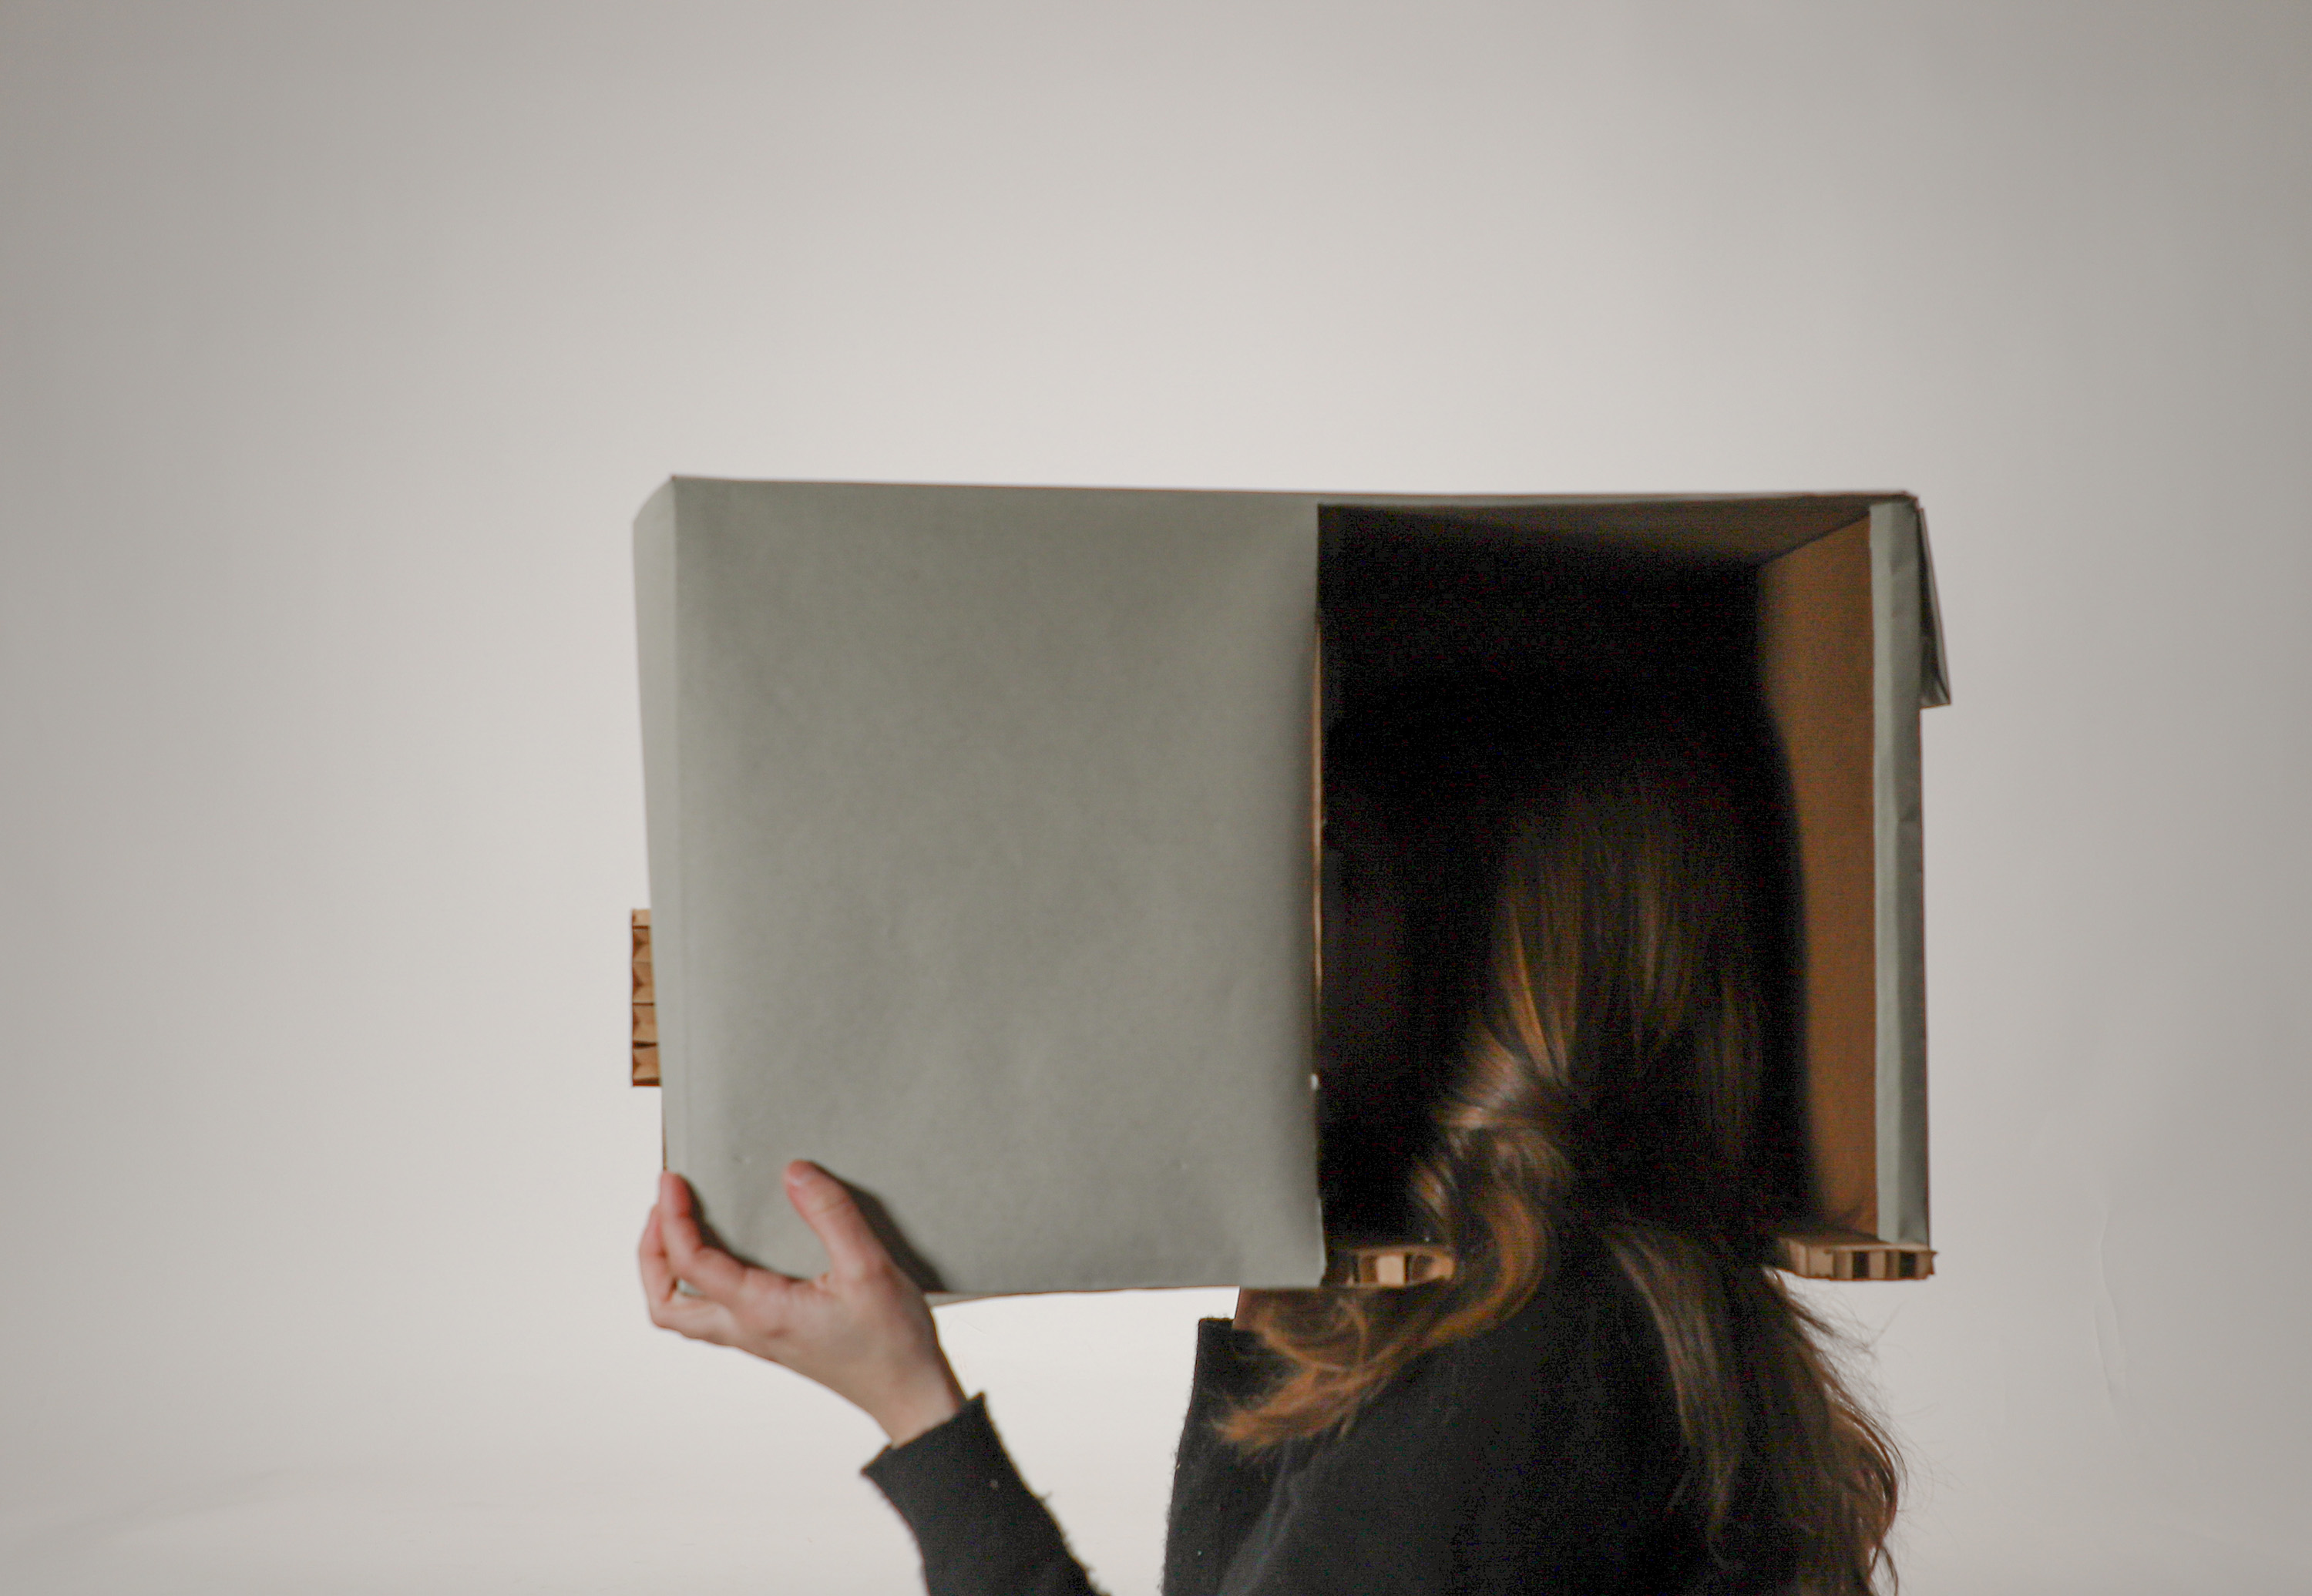 /Woman%20holding%20cardboard%20video-projection%20box%20over%20her%20head